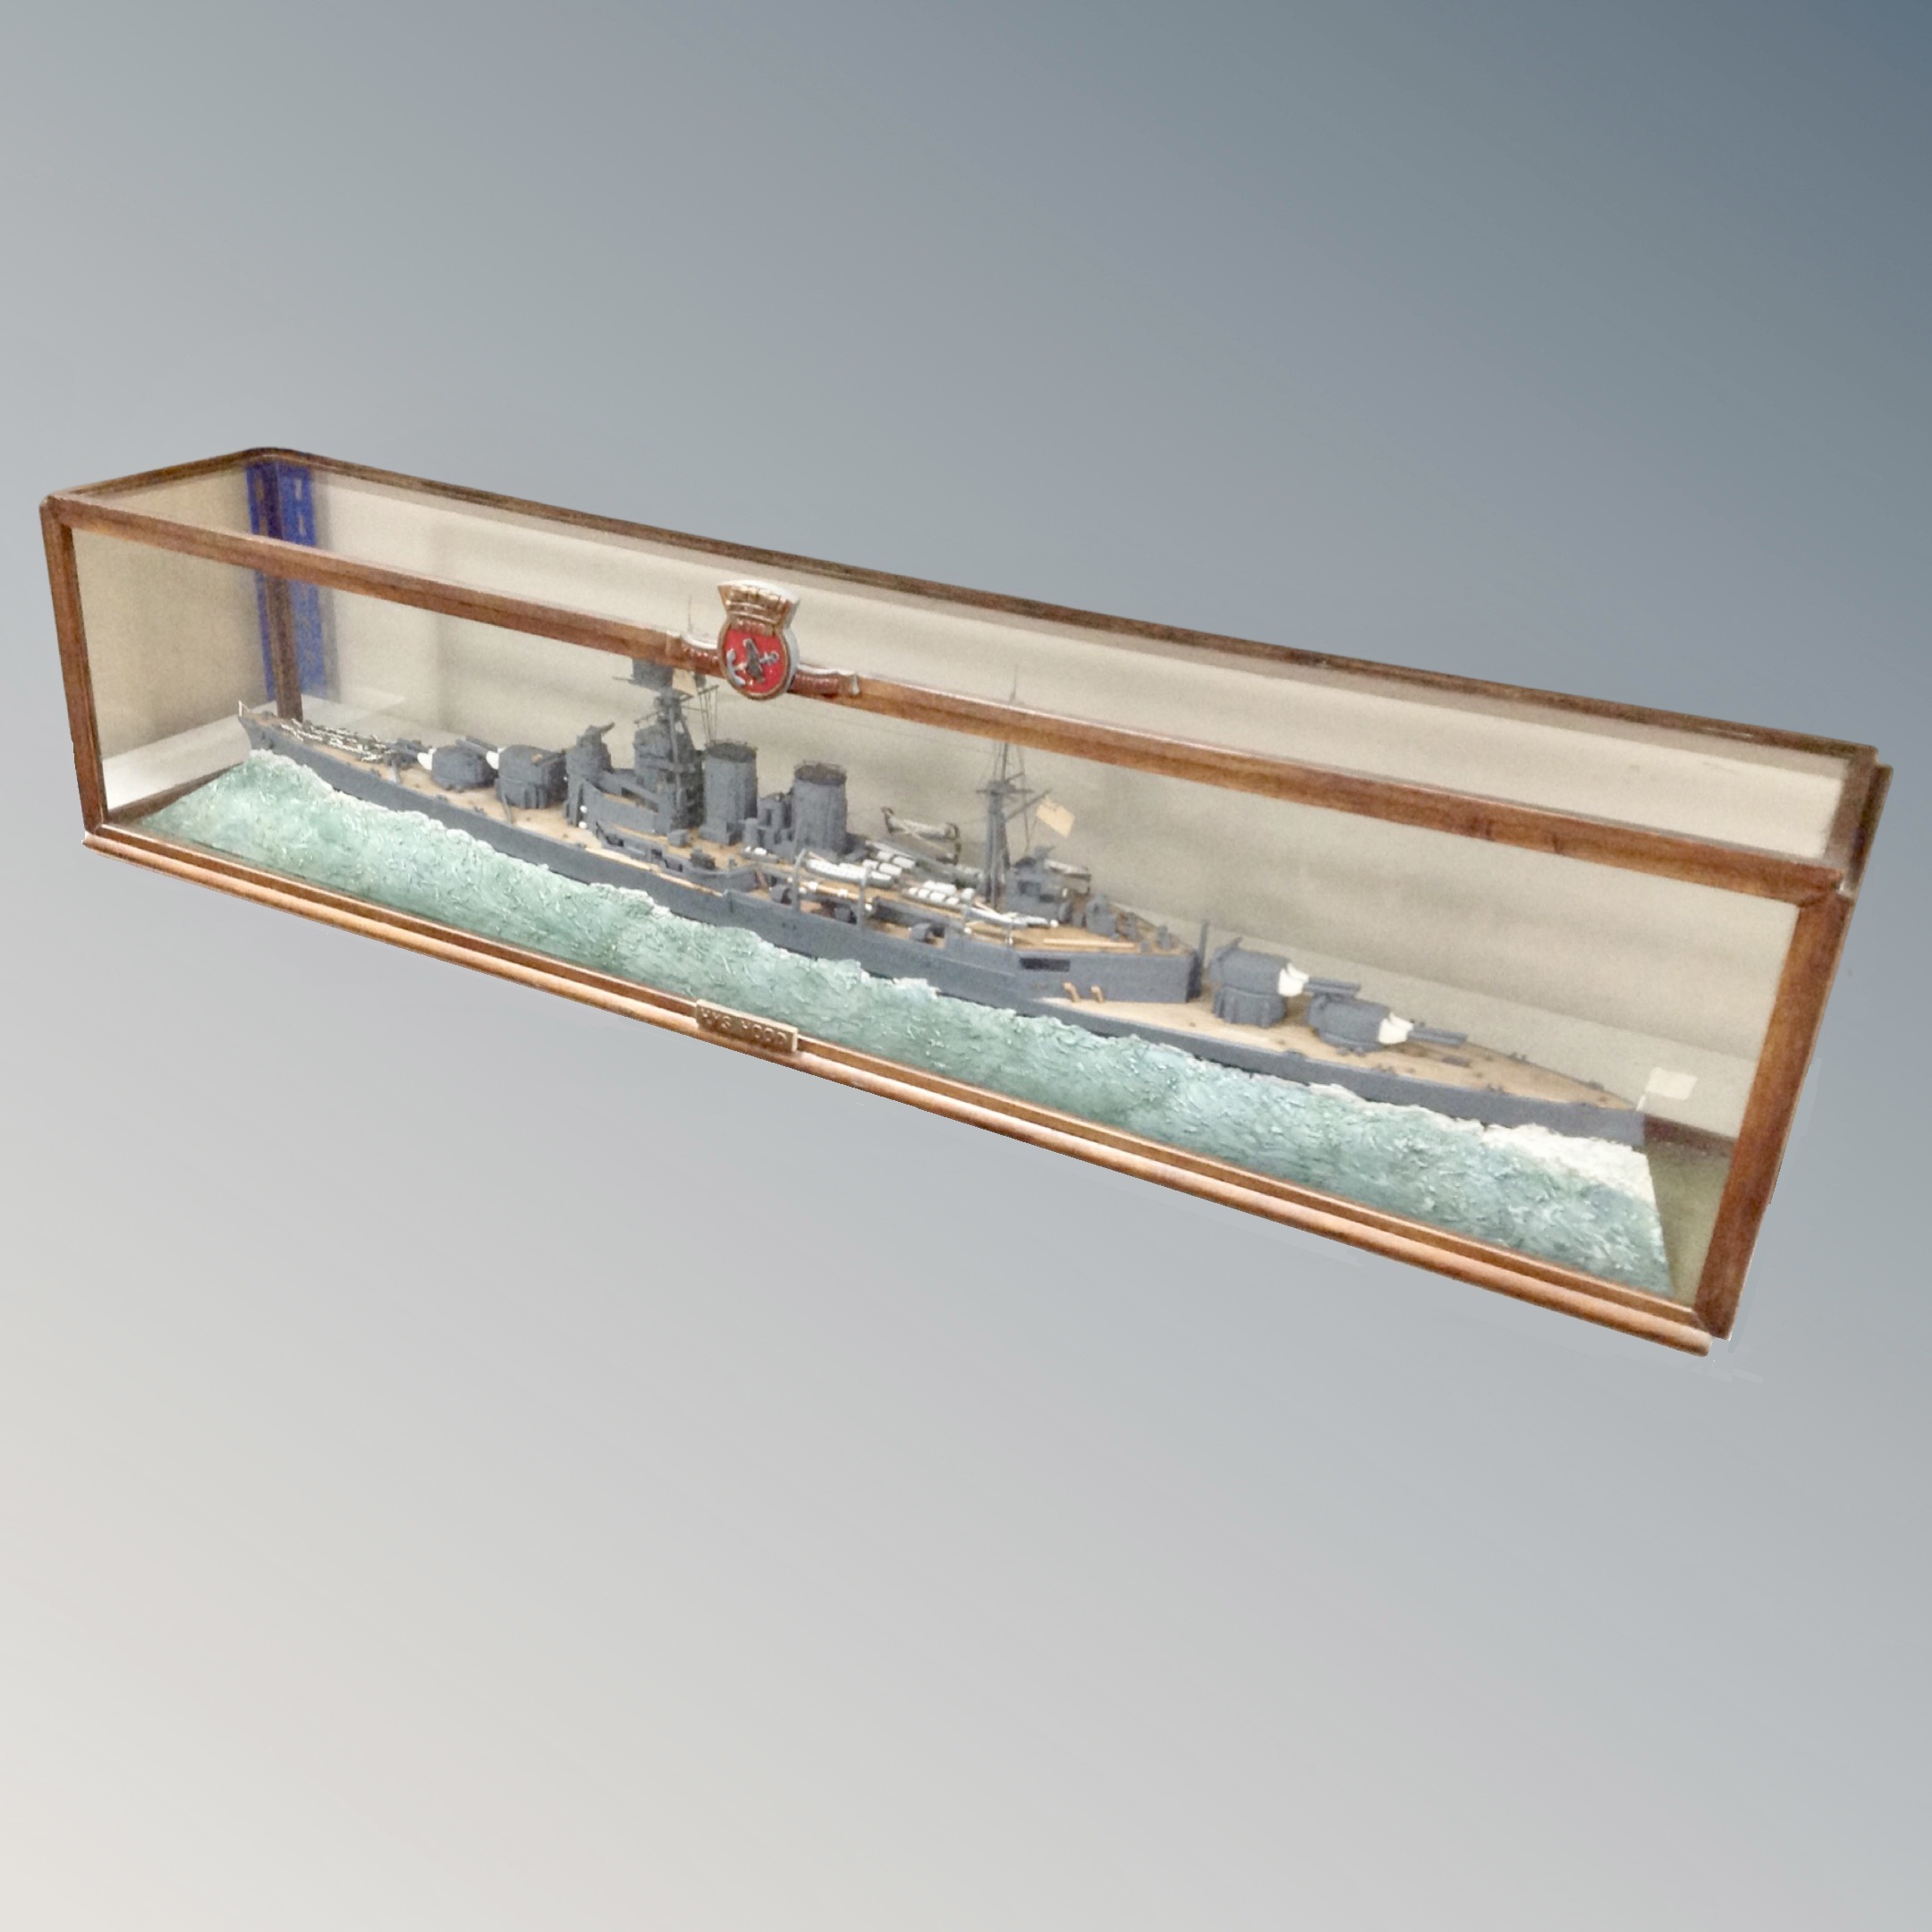 A hand built scale model of the British WWII battleship HMS Hood, in glazed display case, - Image 2 of 3